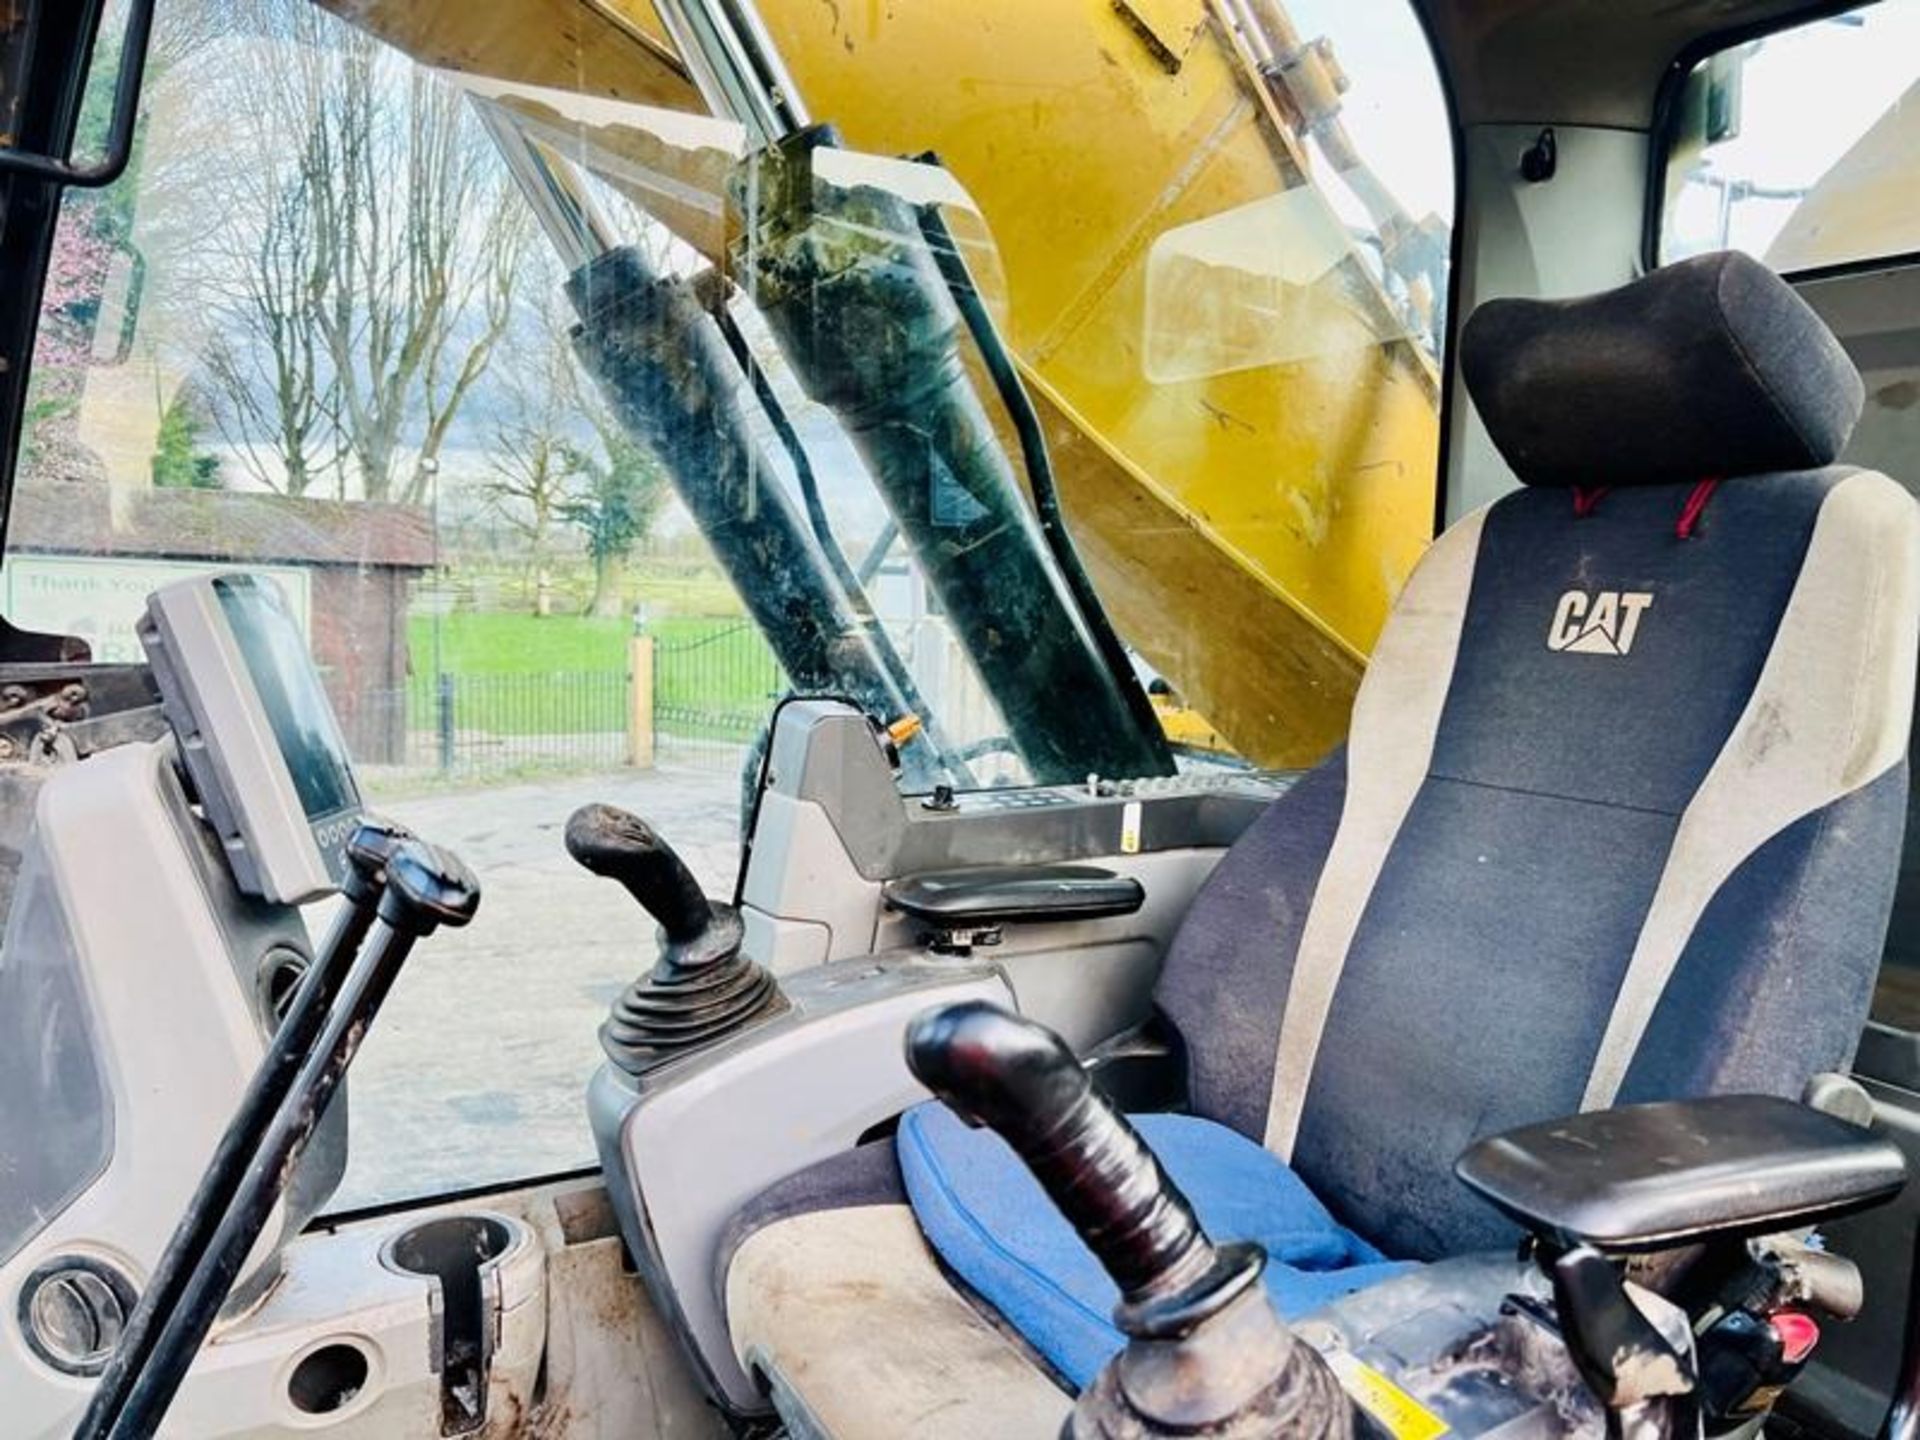 CATERPILLAR 320EL HIGH RISE CABIN TRACKED EXCAVATOR *YEAR 2016* C/W QUICK HITCH - Image 13 of 18